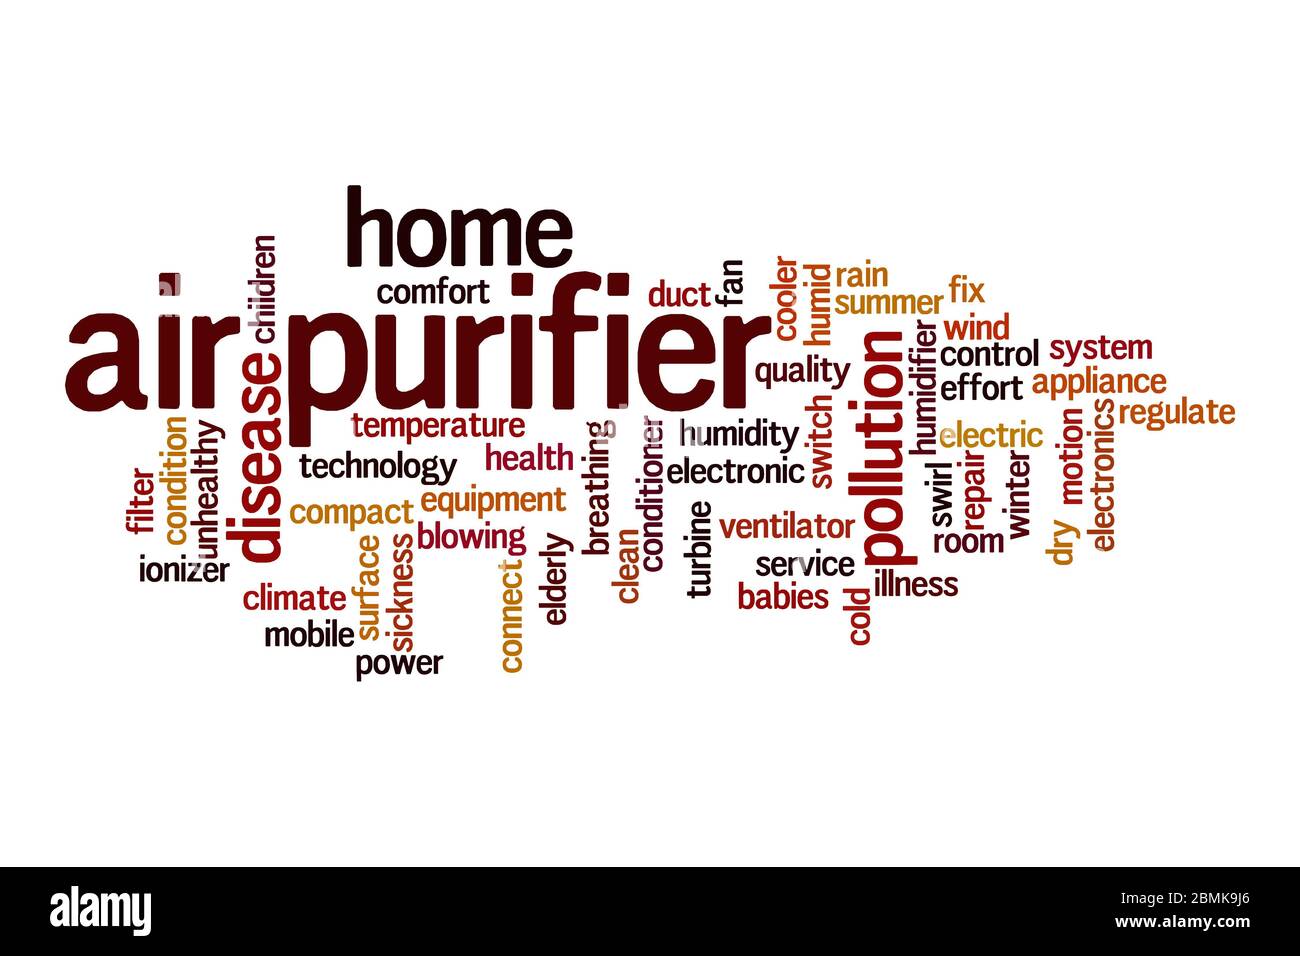 Air purifier word cloud concept on white background Stock Photo